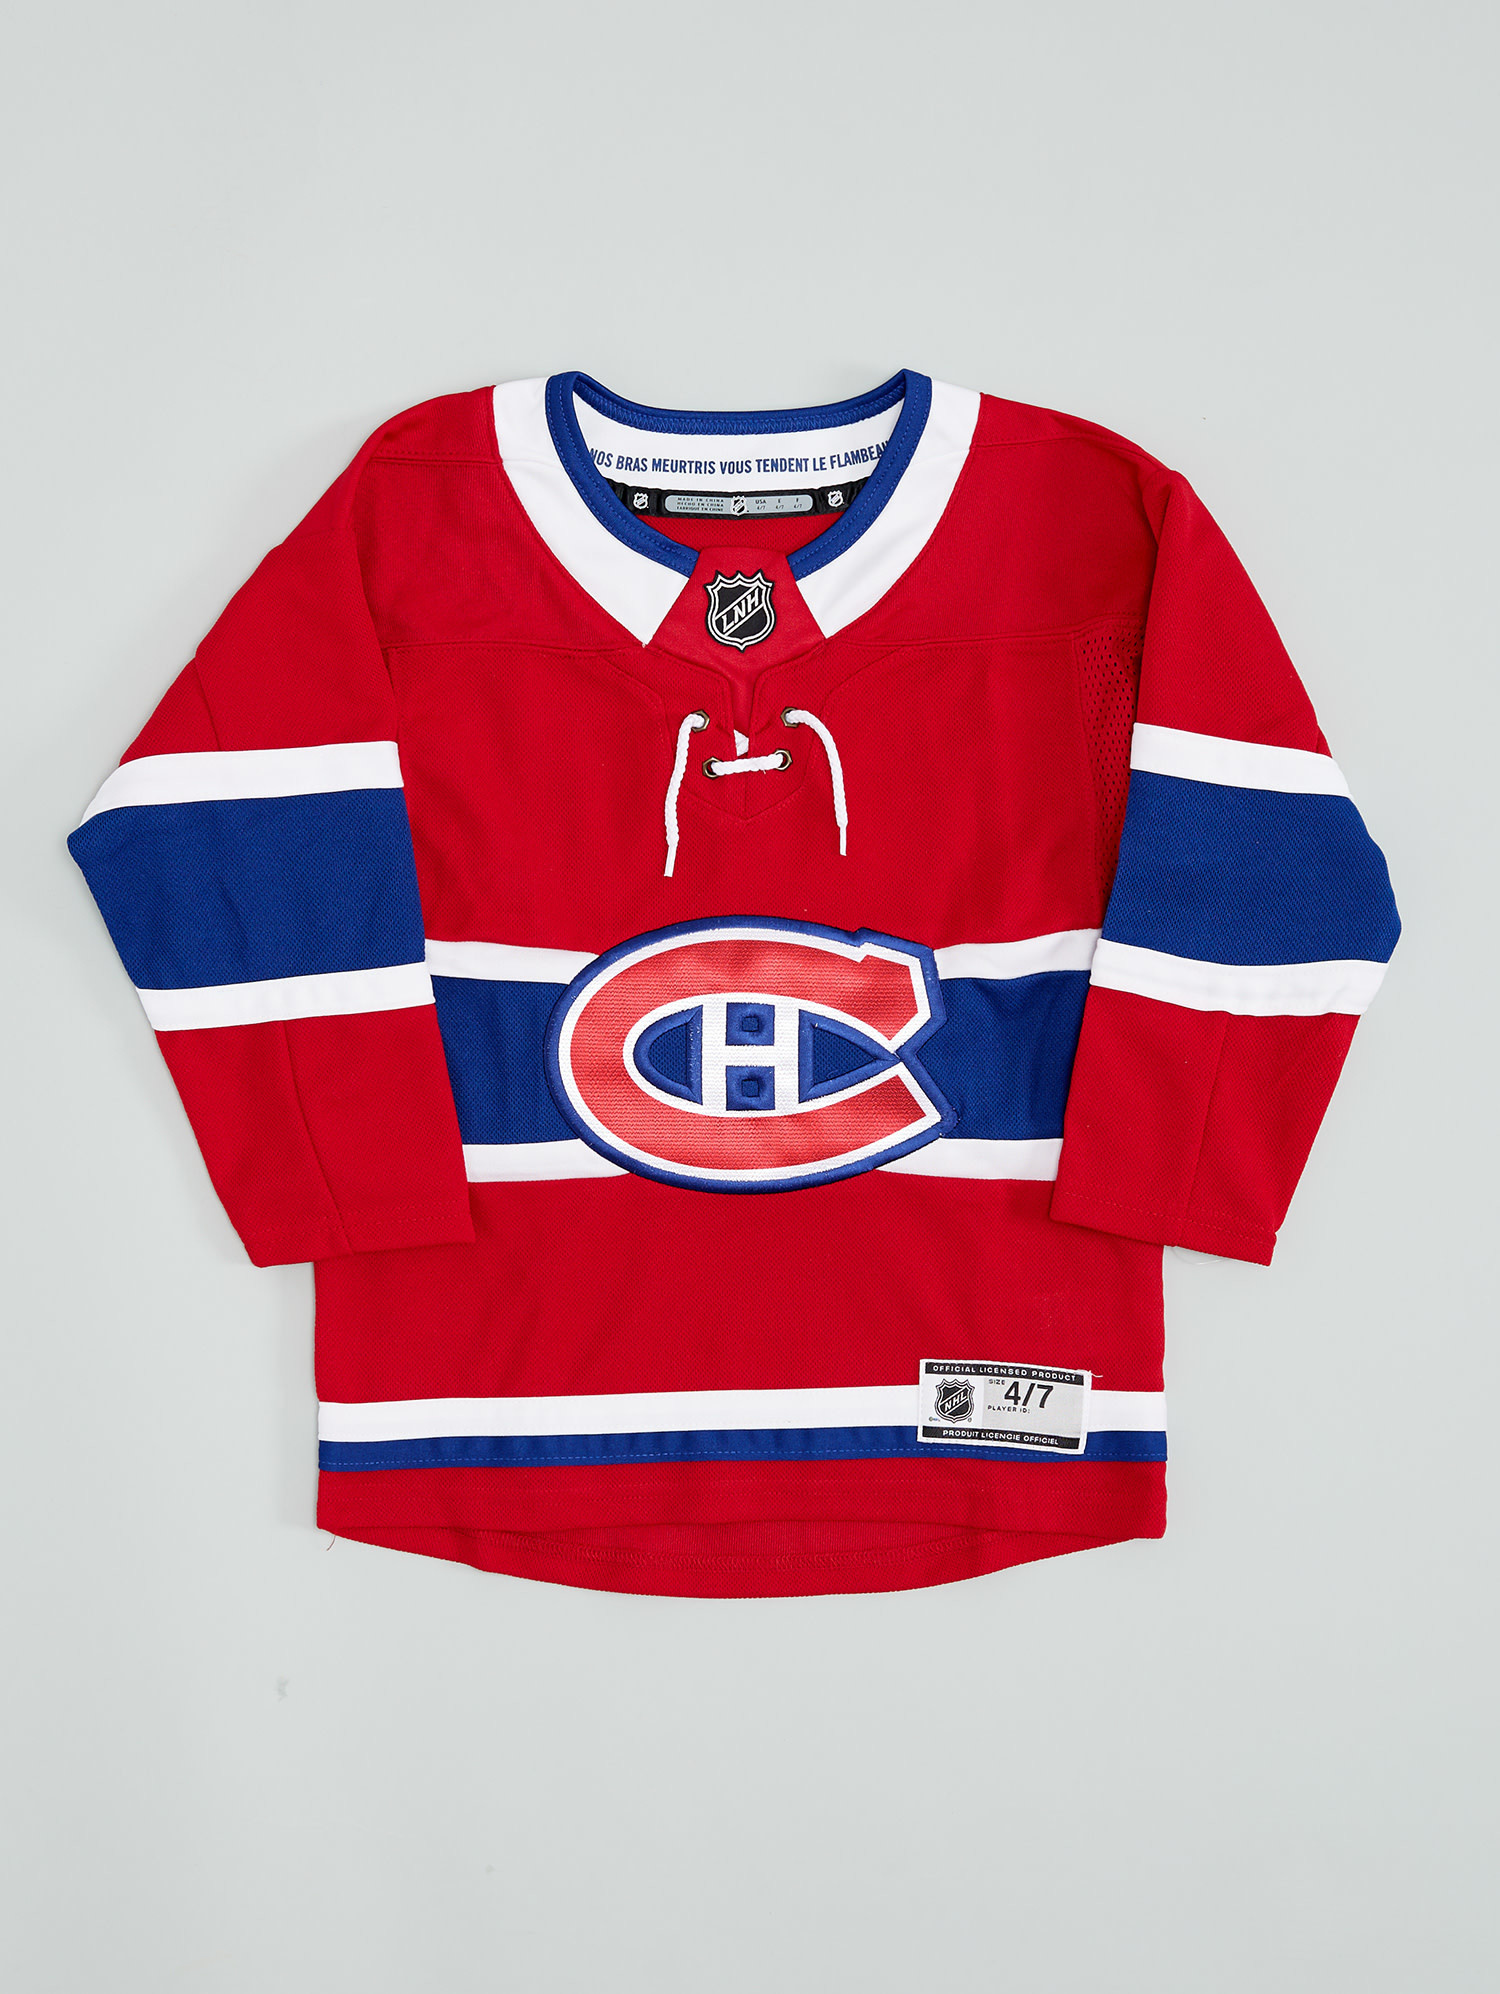 Replica Canadiens Jersey 4 To 7 Years Old Tricolore Sports Tricolore Sports